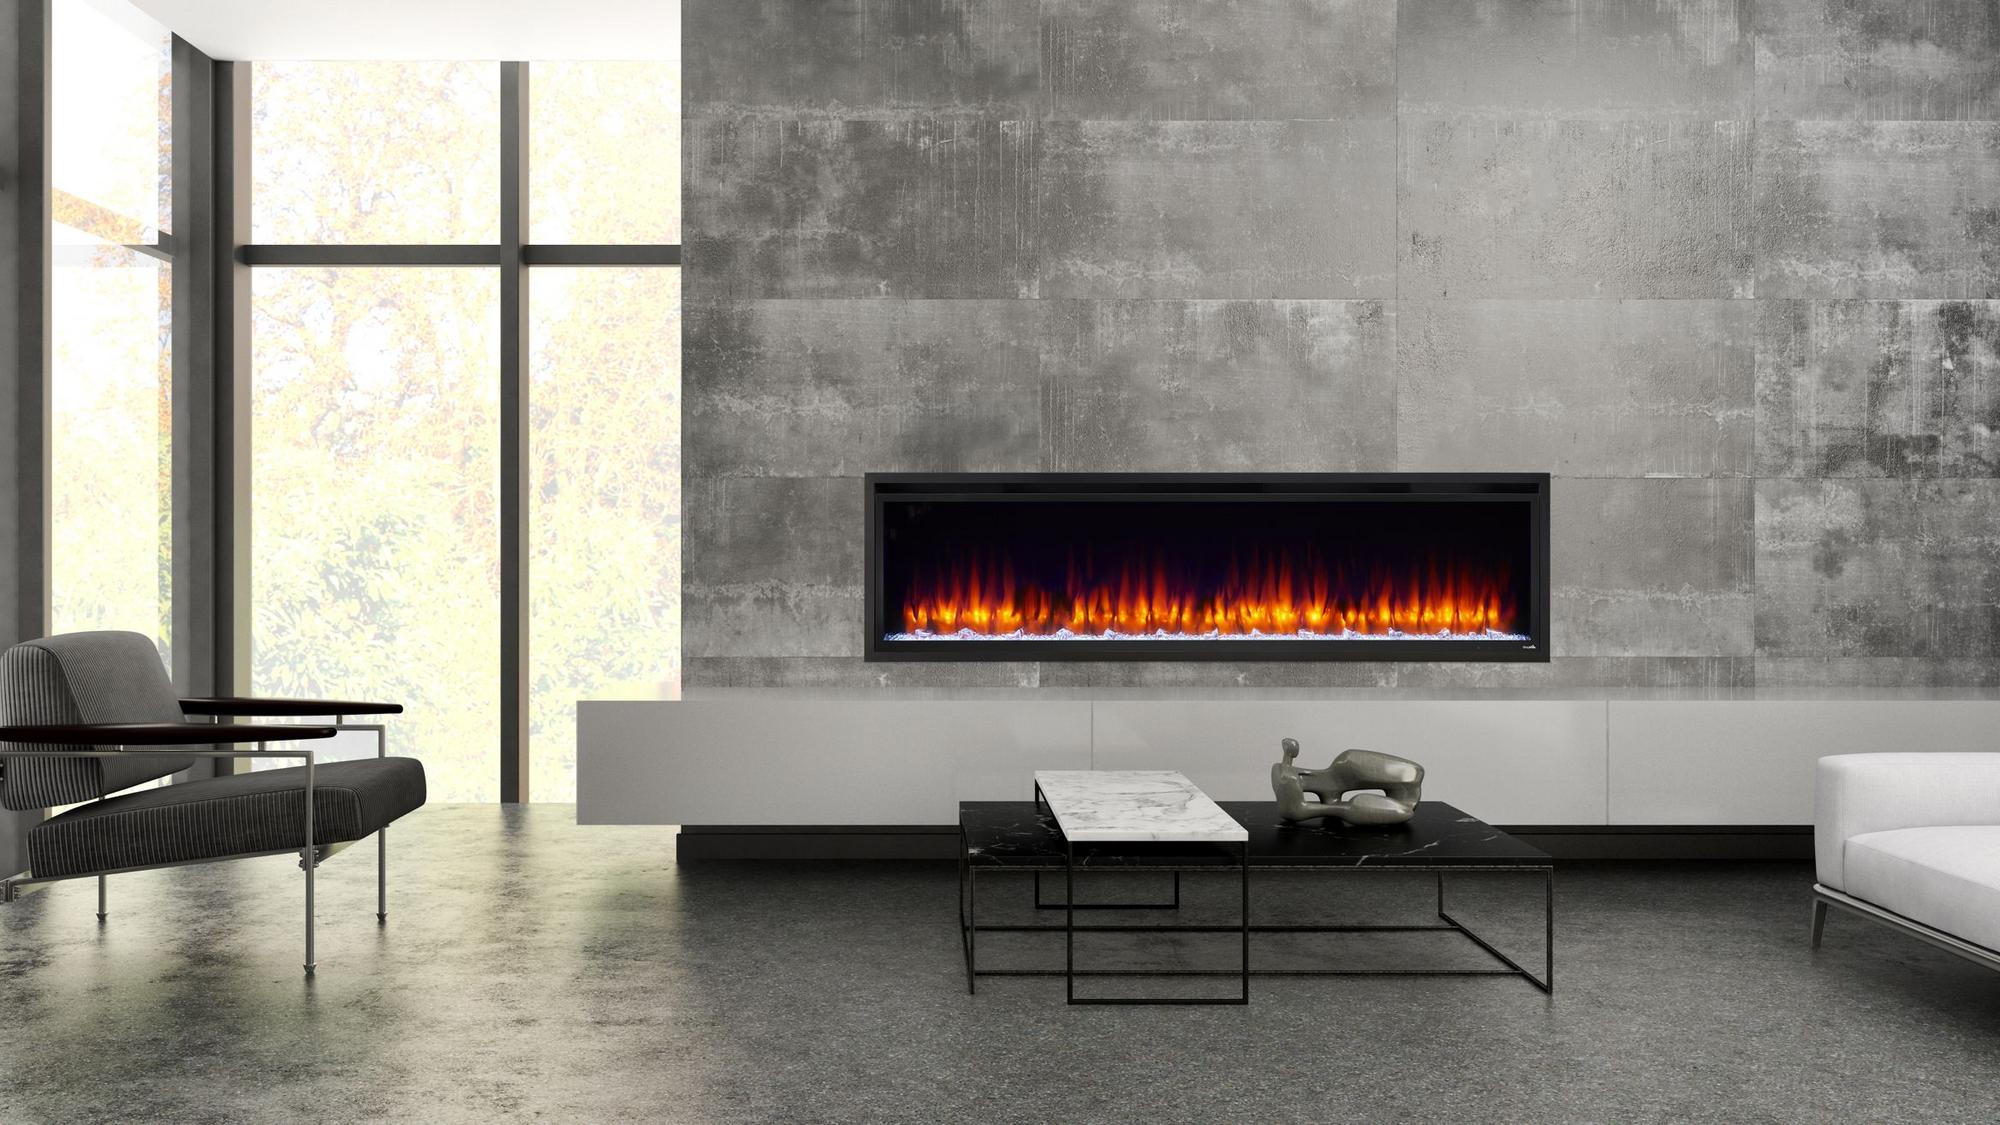 How Much Electricity Does An Electric Fireplace Use